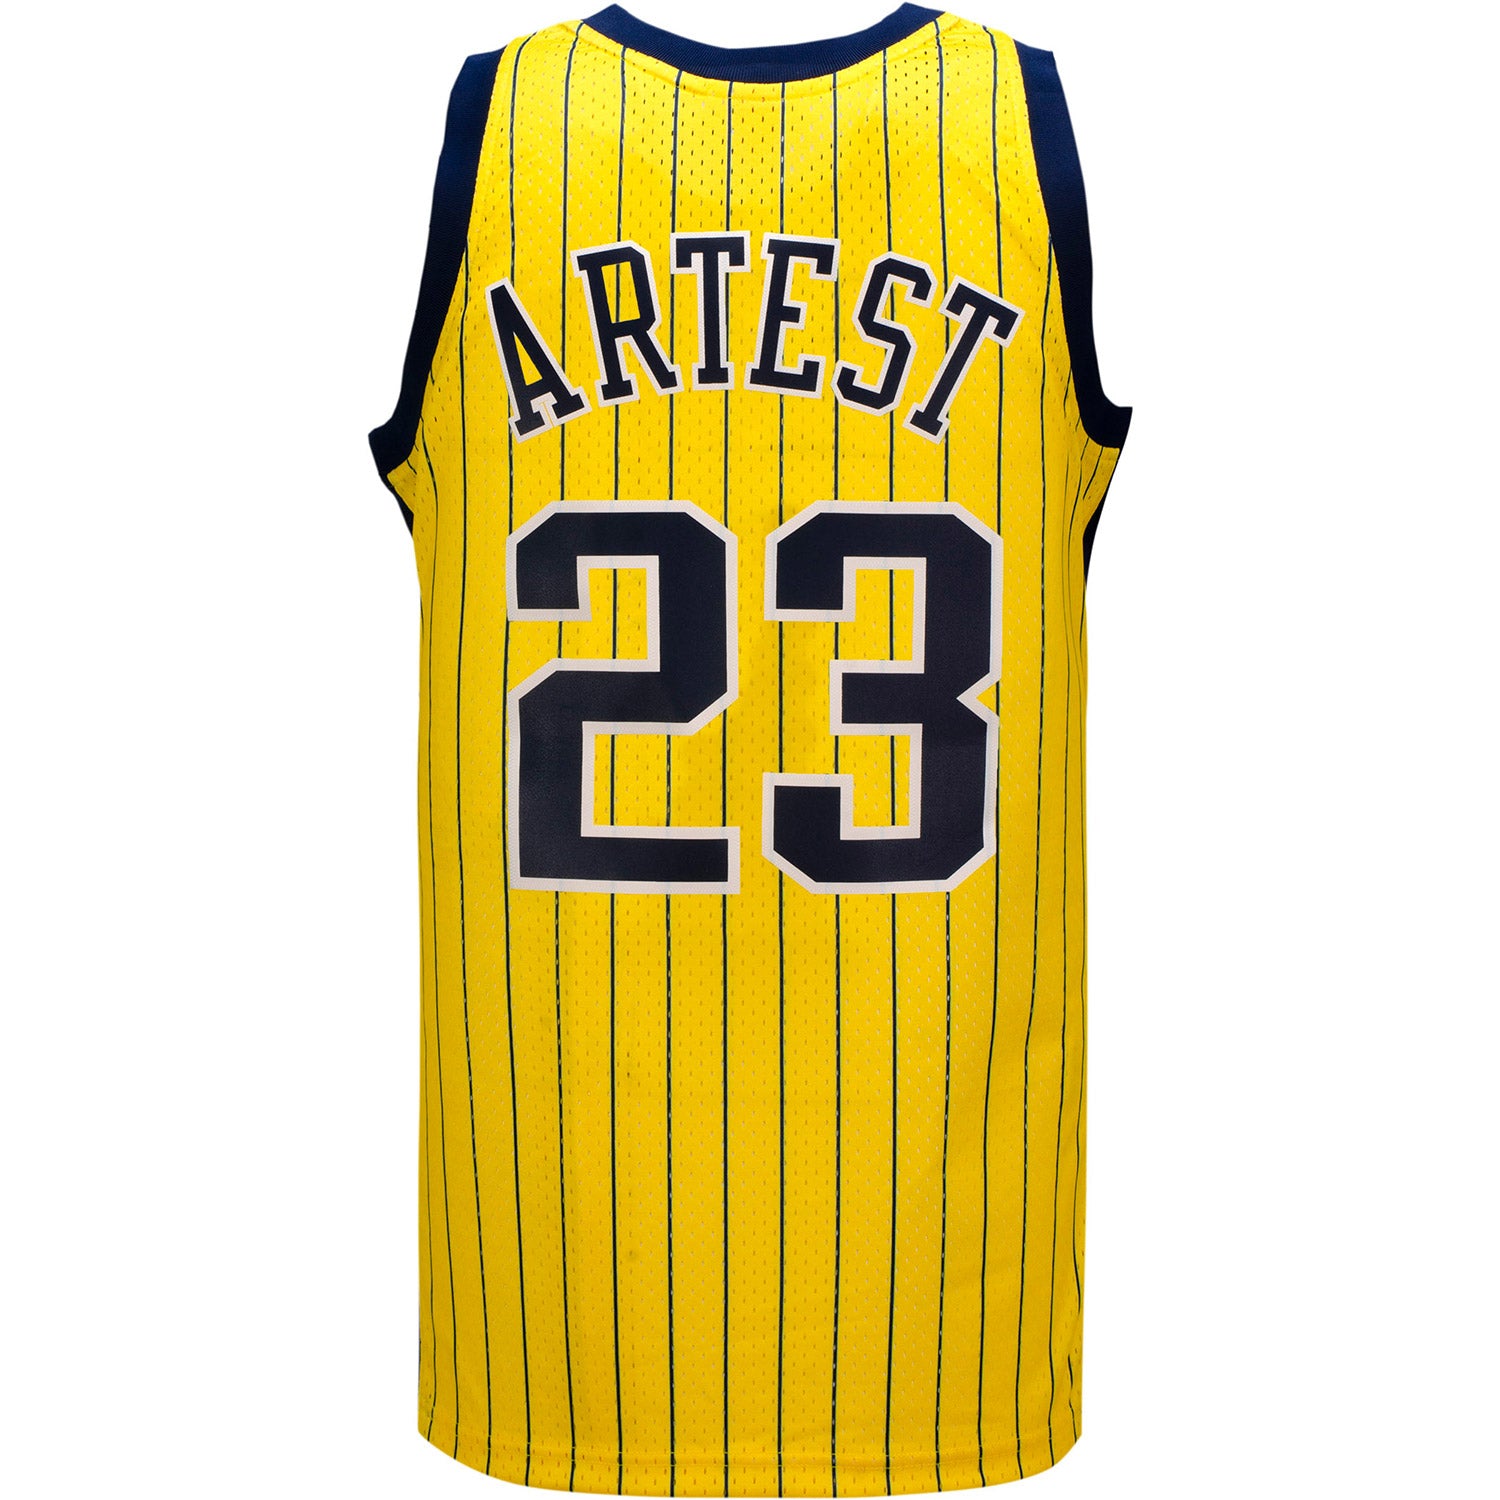 ron artest jersey numbers